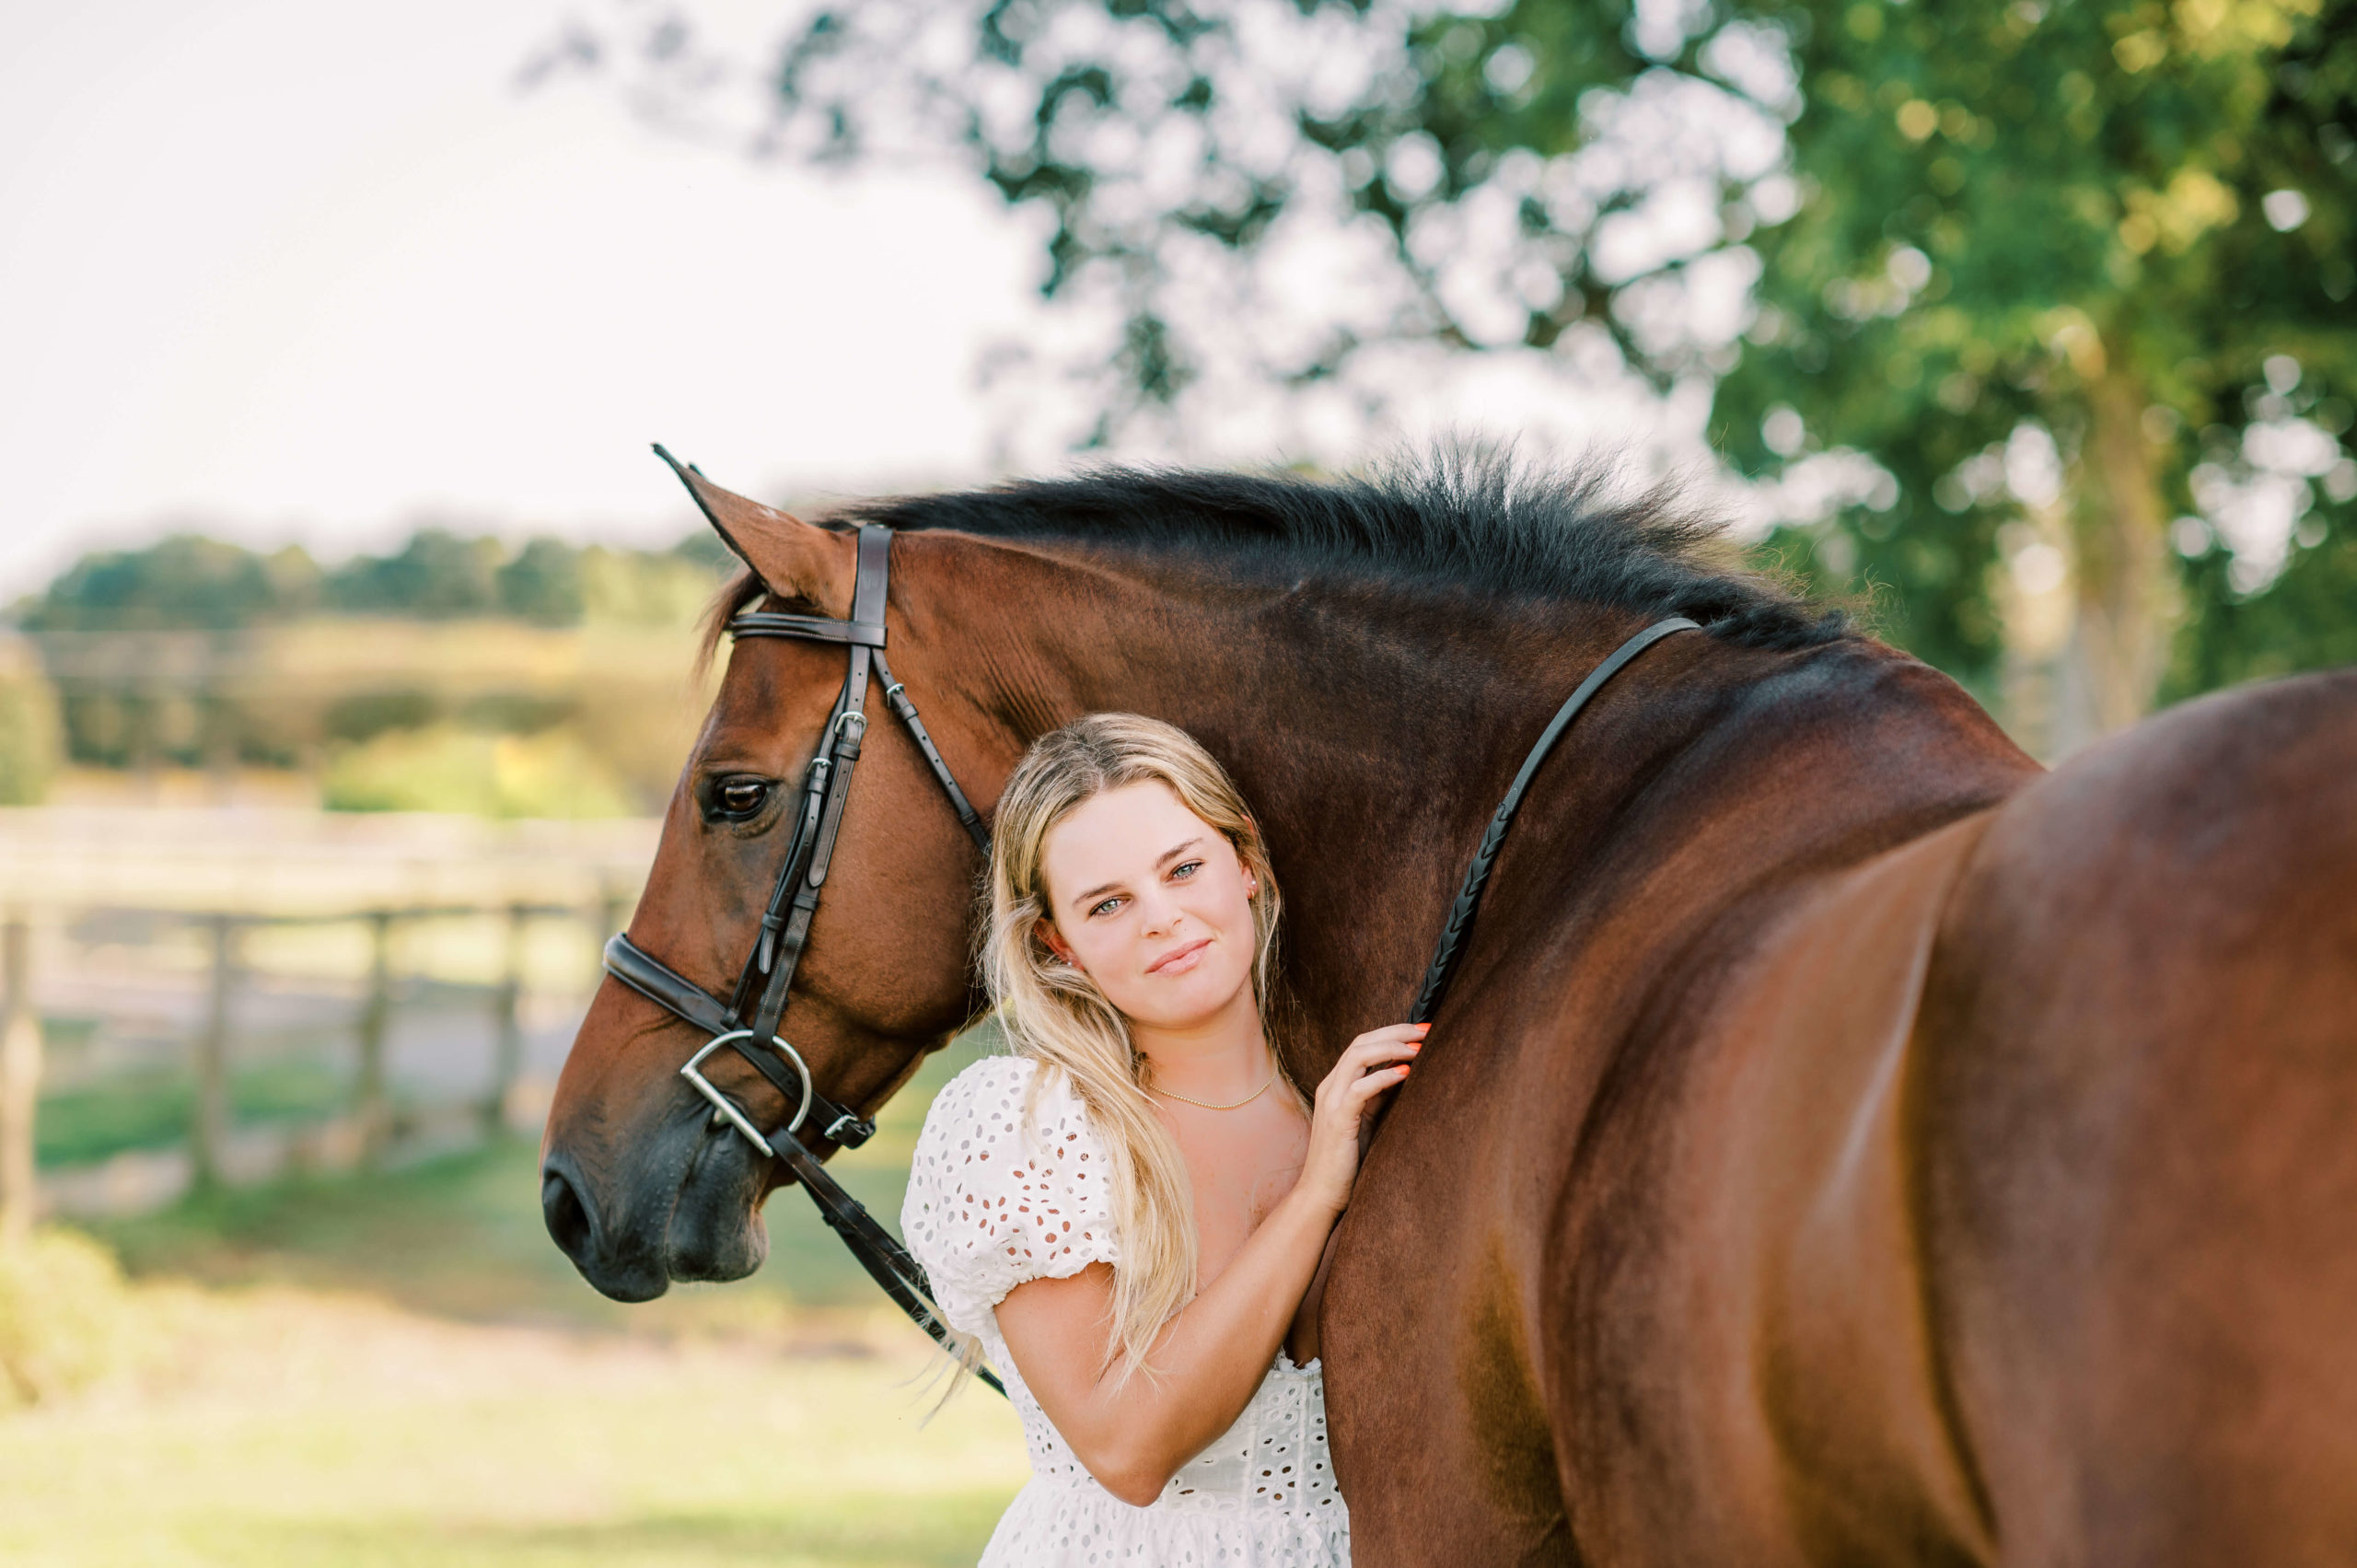 equine senior portraits virginia beach Equine Senior Portraits Virginia Beach Paige's equestrian senior session was so much fun that my cheeks were tired from smiling and laughing after just 30 minutes into the session. Her super sweet horse, Quentin, has a big, super sweet personality and I think we definitely captured that, as well as how much he loves Paige, in these portraits.